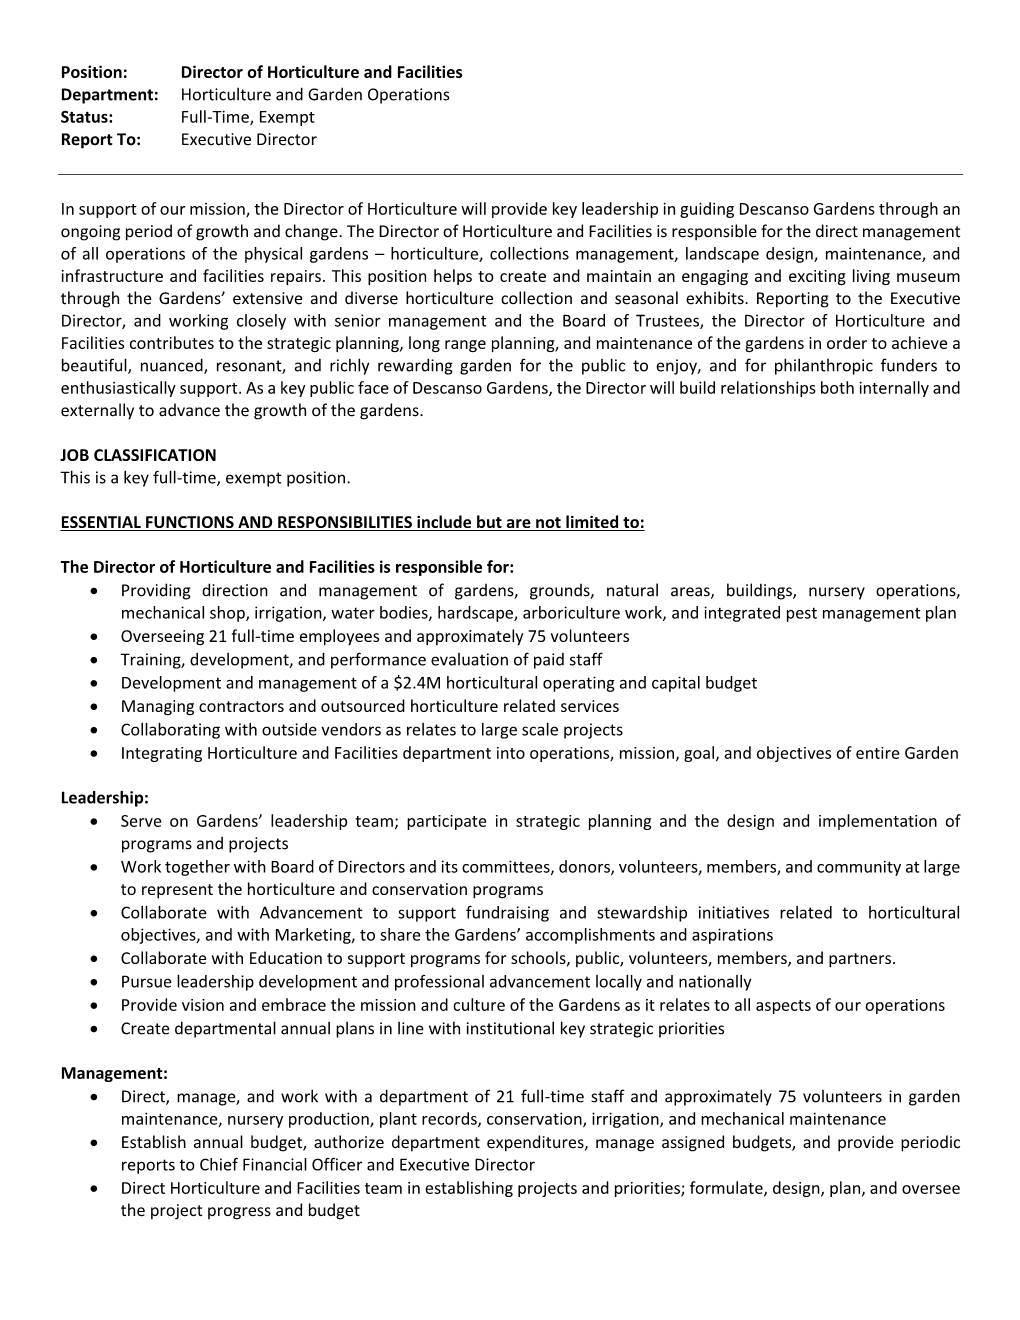 Position: Director of Horticulture and Facilities Department: Horticulture and Garden Operations Status: Full-Time, Exempt Report To: Executive Director